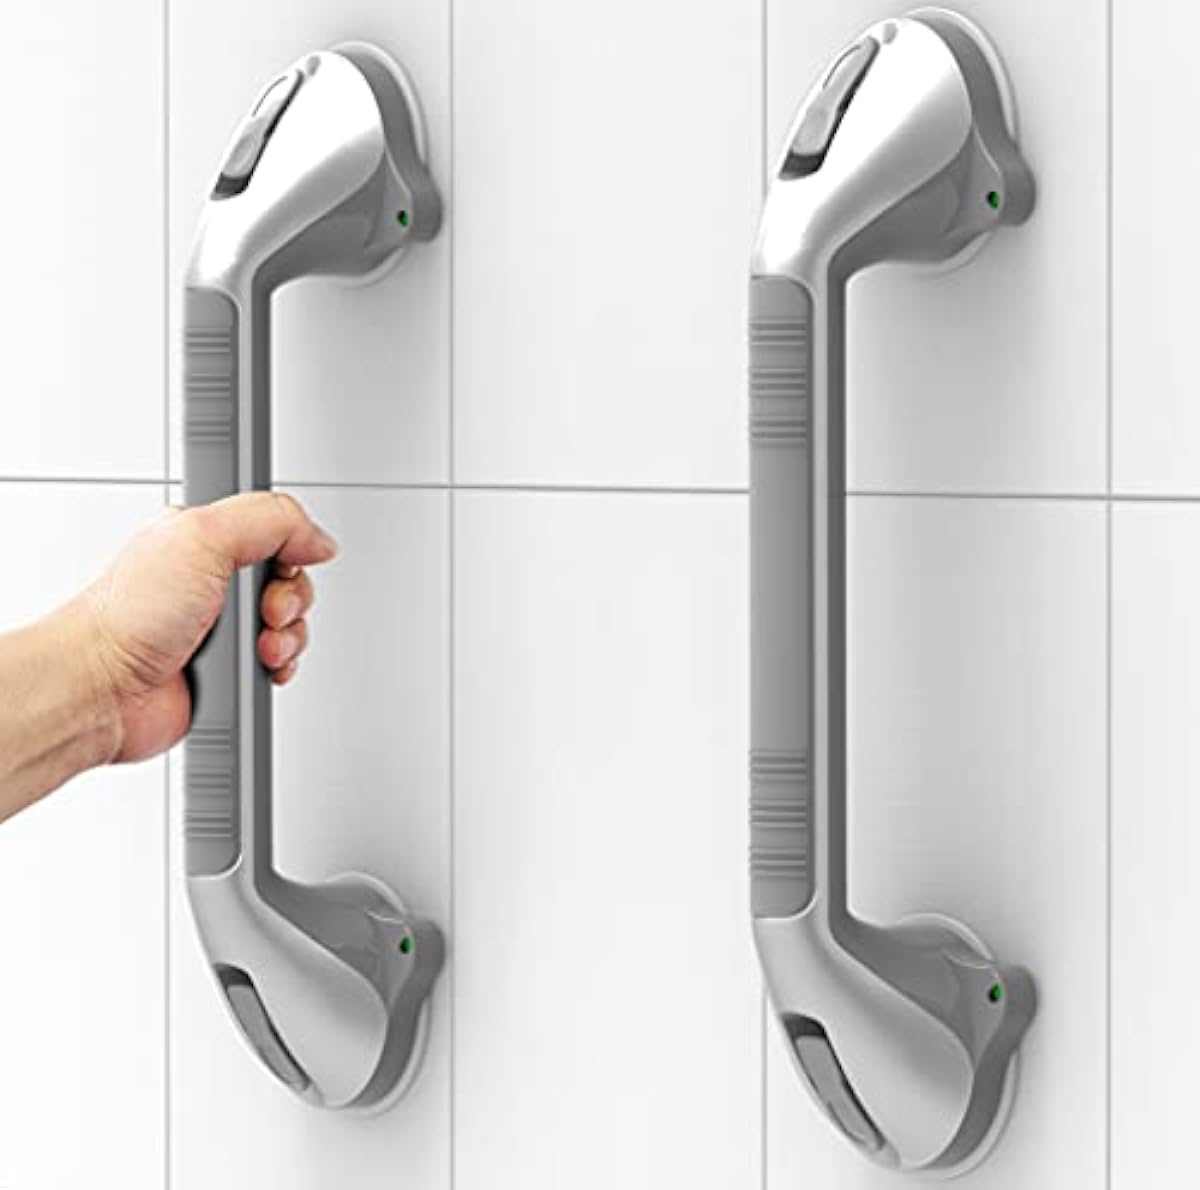 AquaChase 2-Pack 17“ Suction Shower Grab Bar with Indicators, Tool-Free Installation, Steady Handle for Balance Assist for Bathtub, Toilet, Bathroom, Dual Tone, Silver/Grey